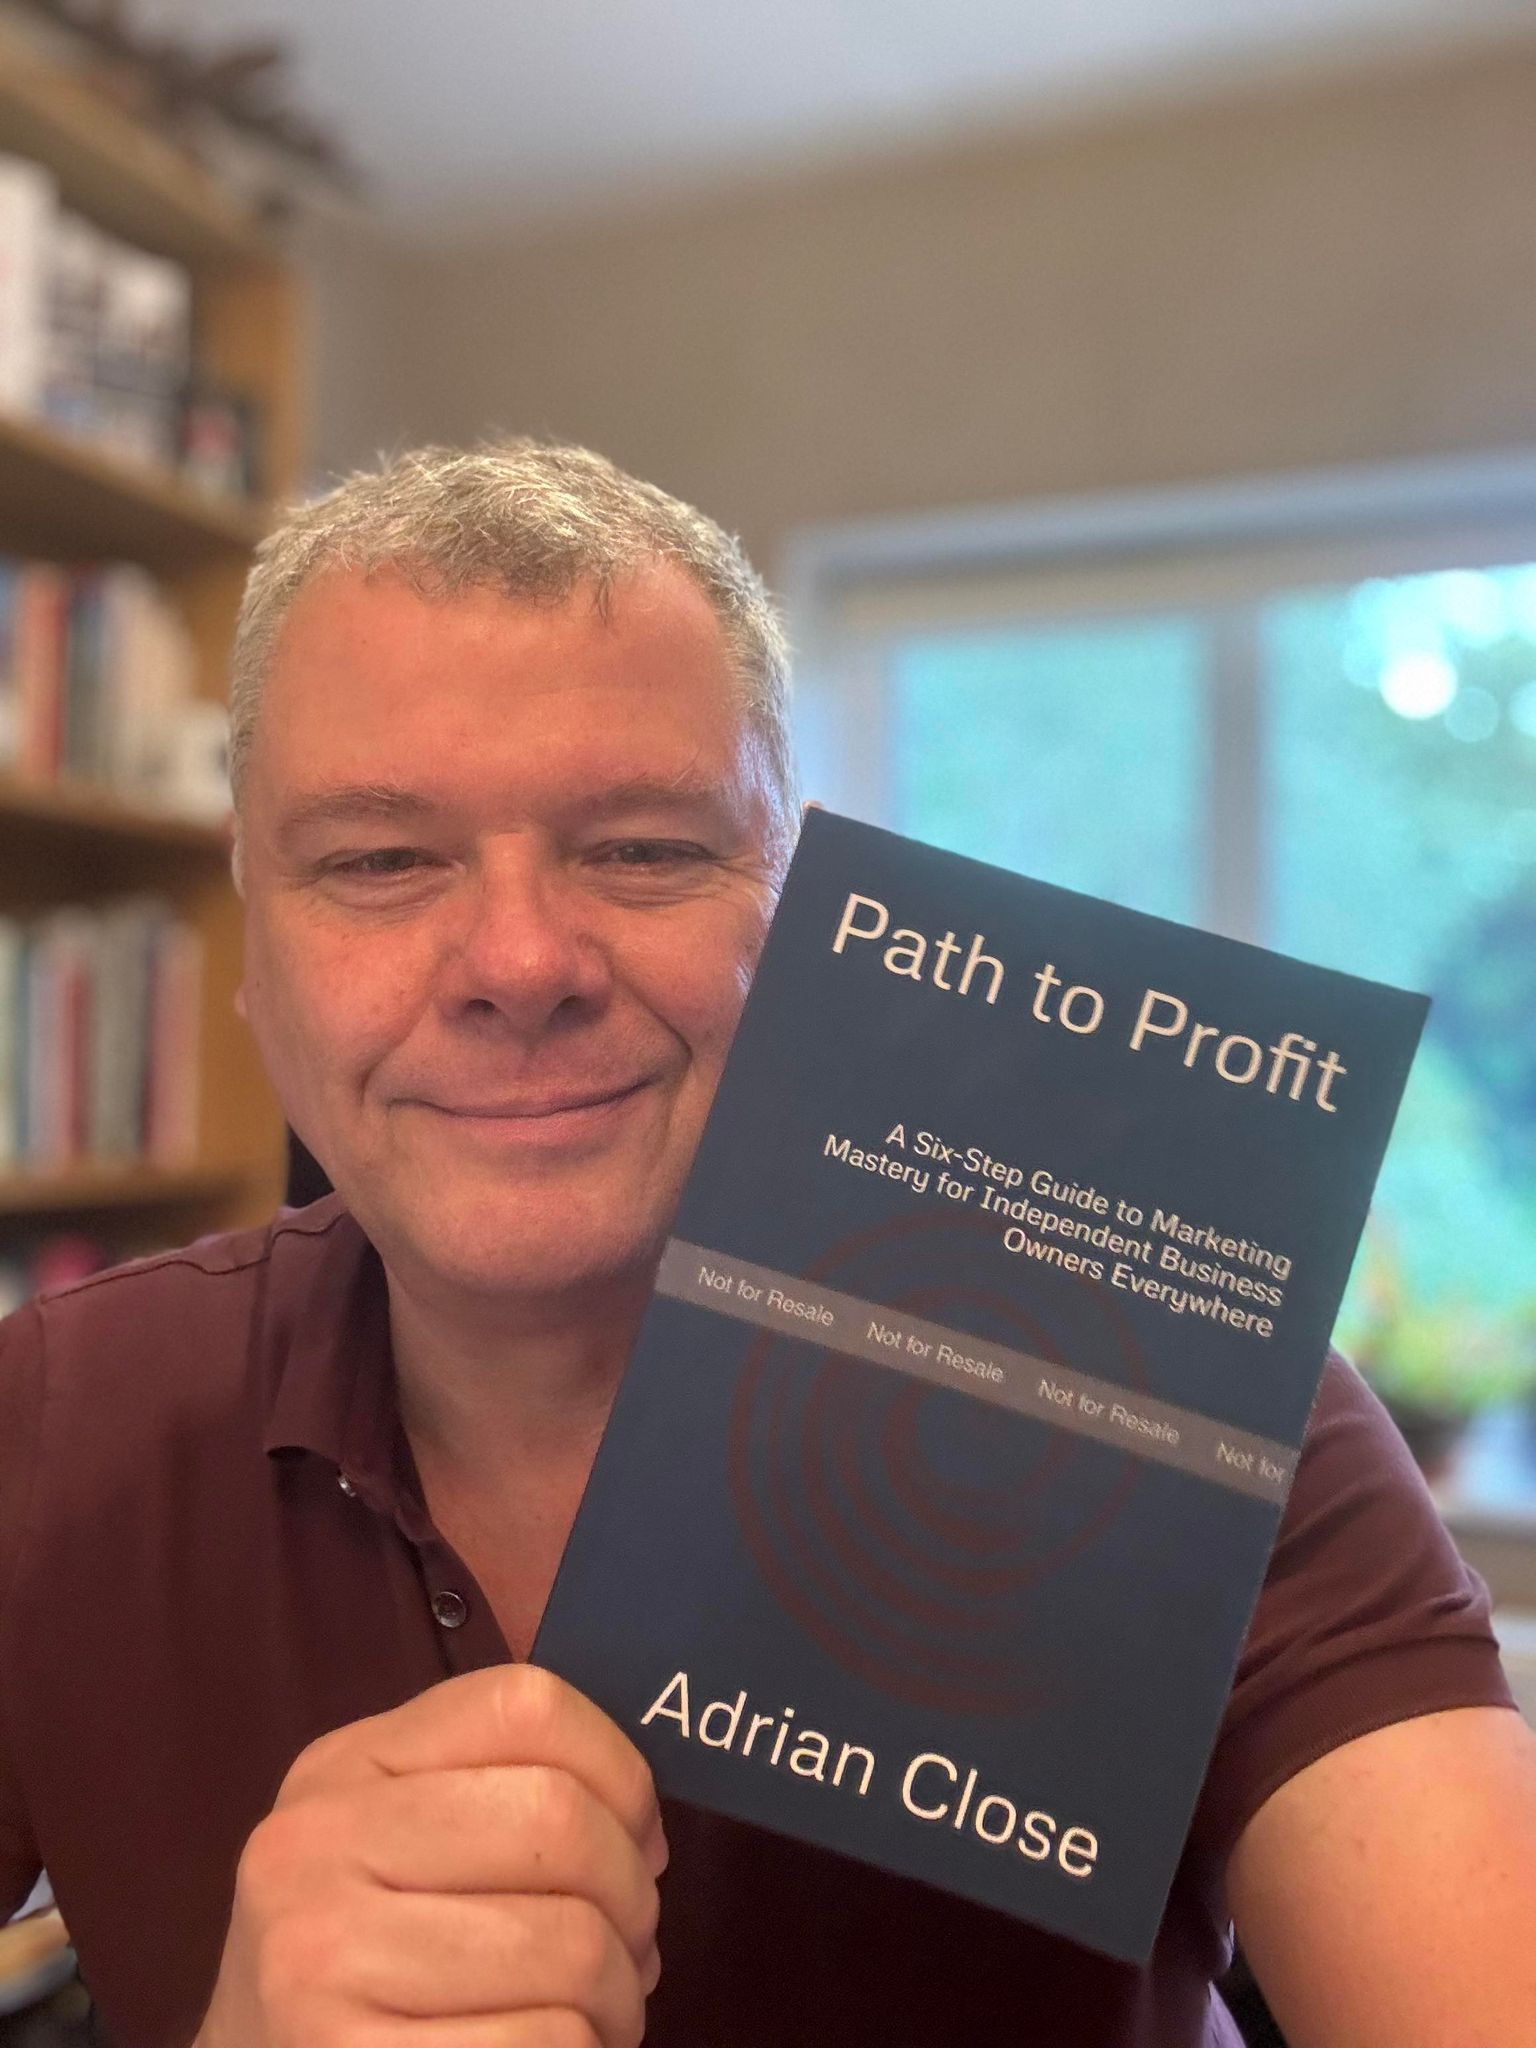 Adrian close training consultant, director of learning at Ultimate Leadership training and author of Path to Profit